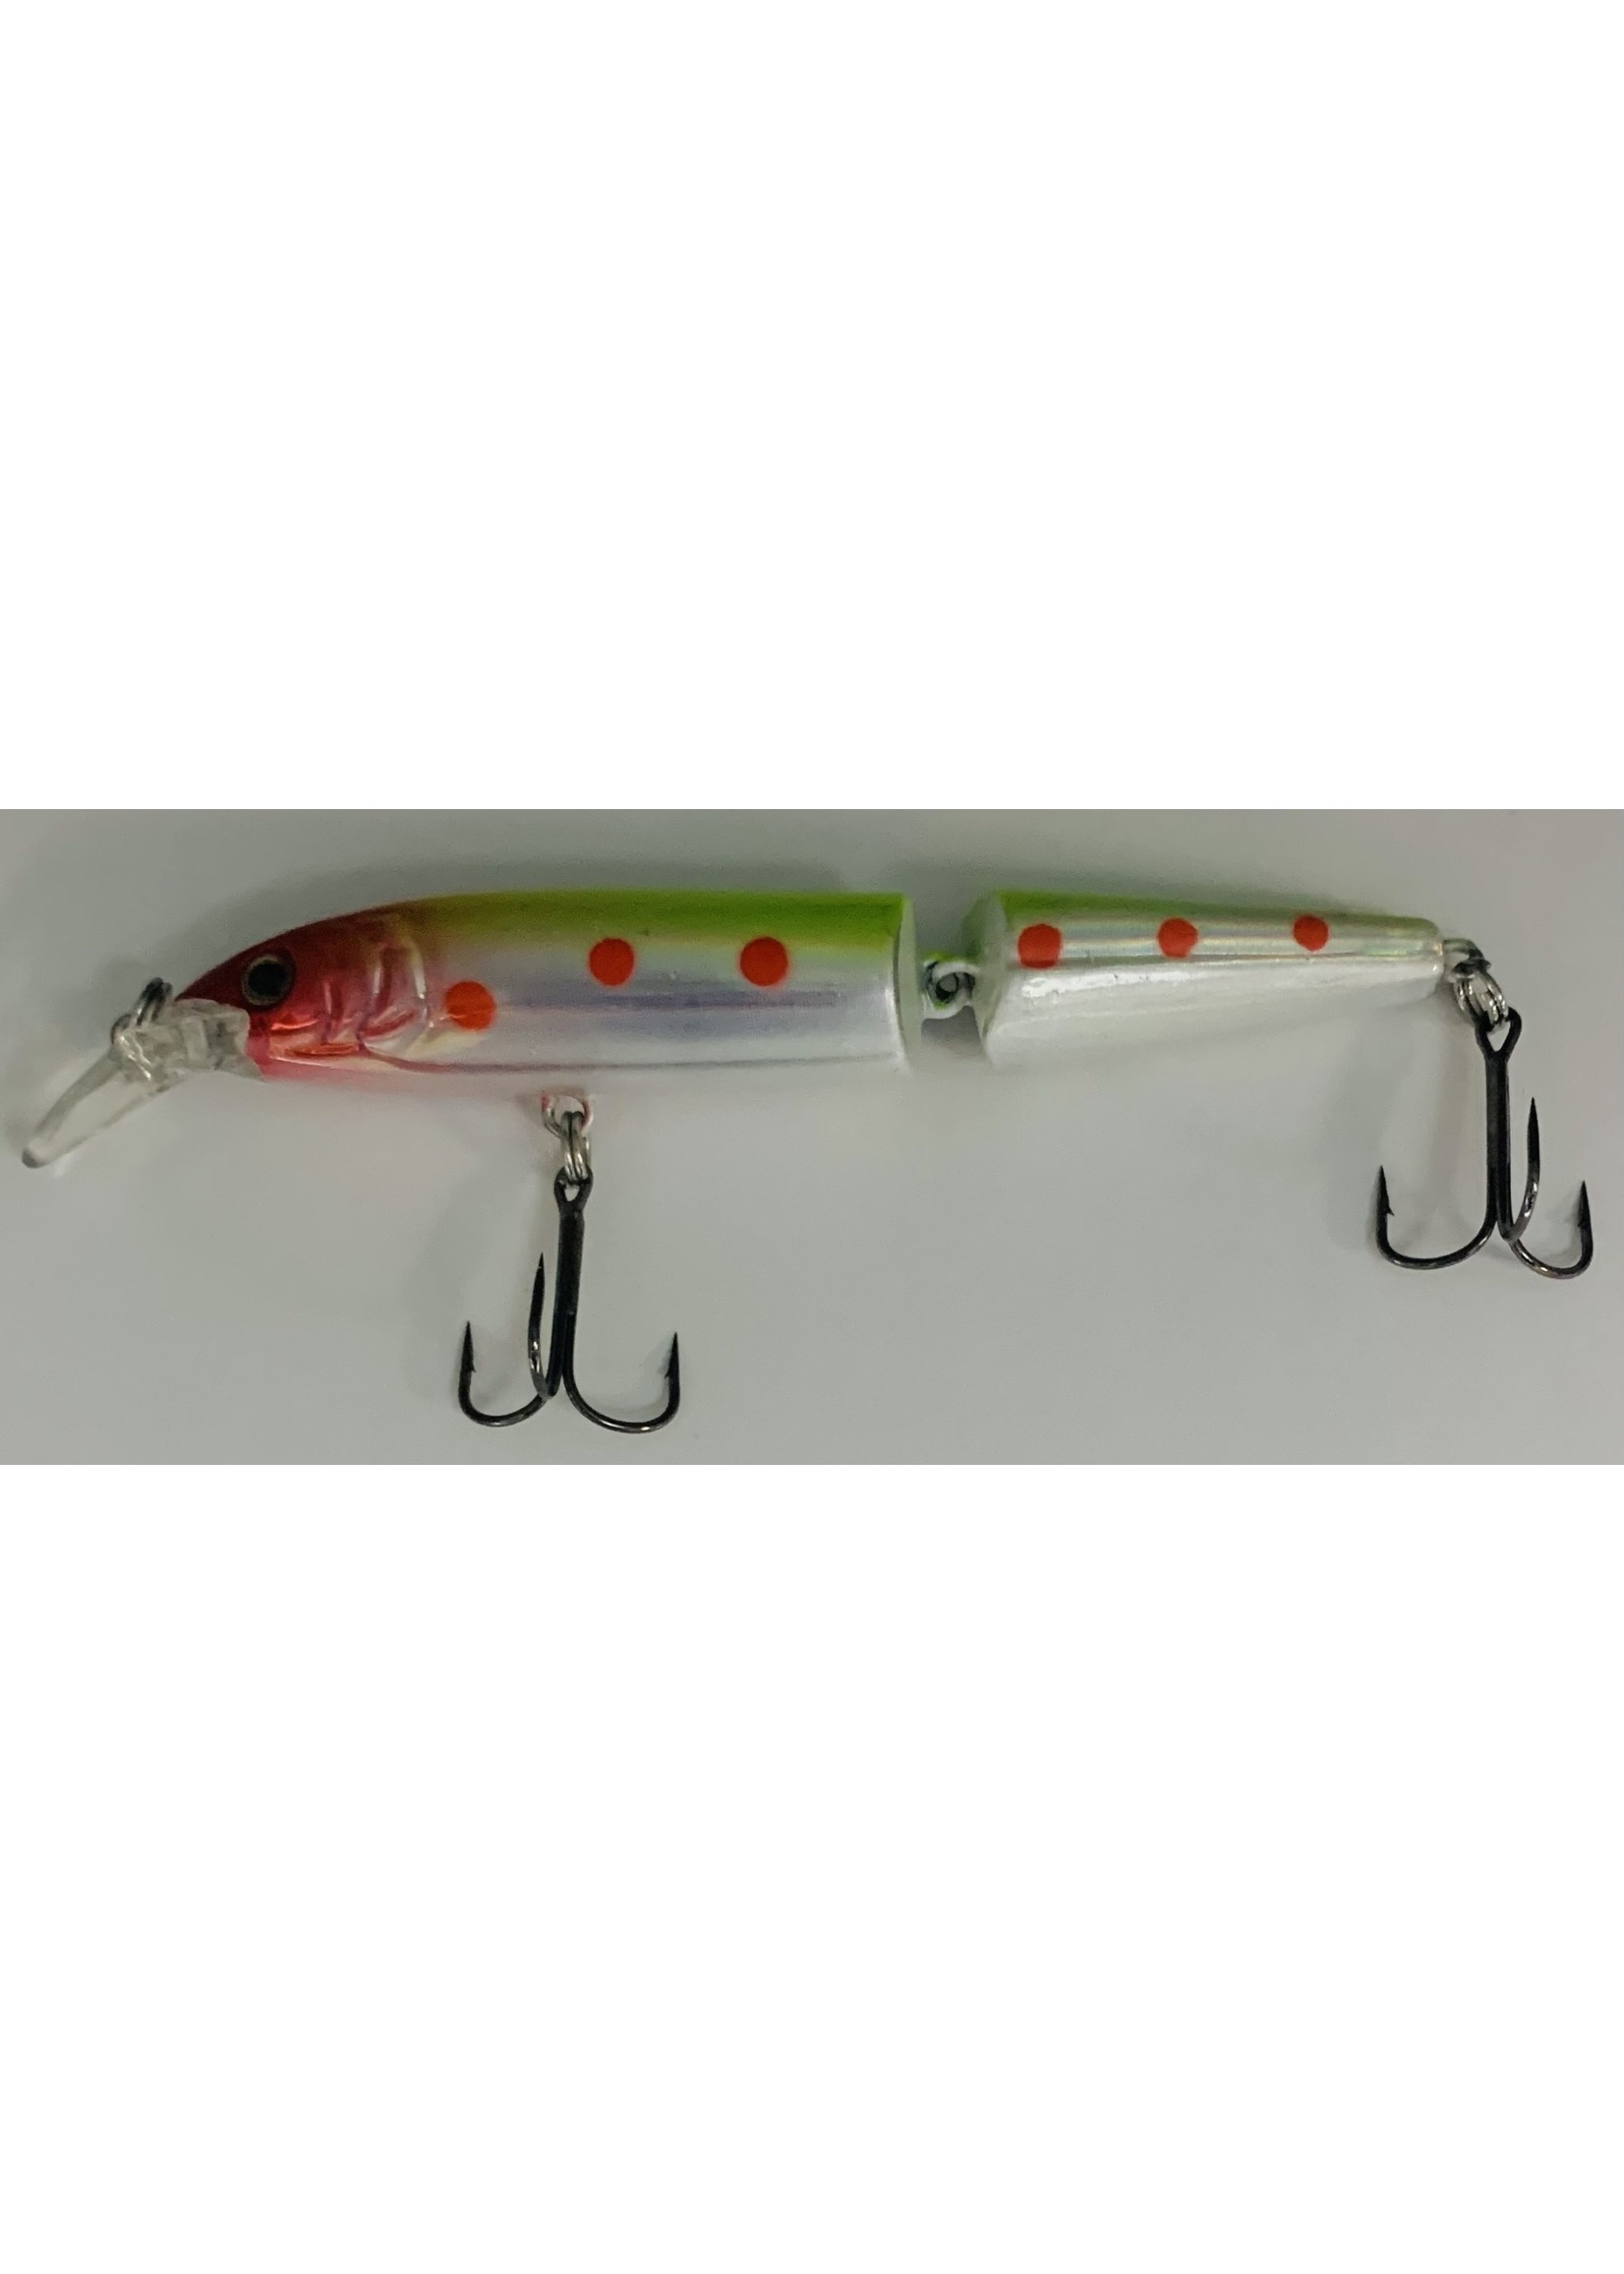 BELL OUTDOOR PRODUCTS SLIVER CREEK LURE JOINTED MINNOW 9cm  DIVE 3-5 FT